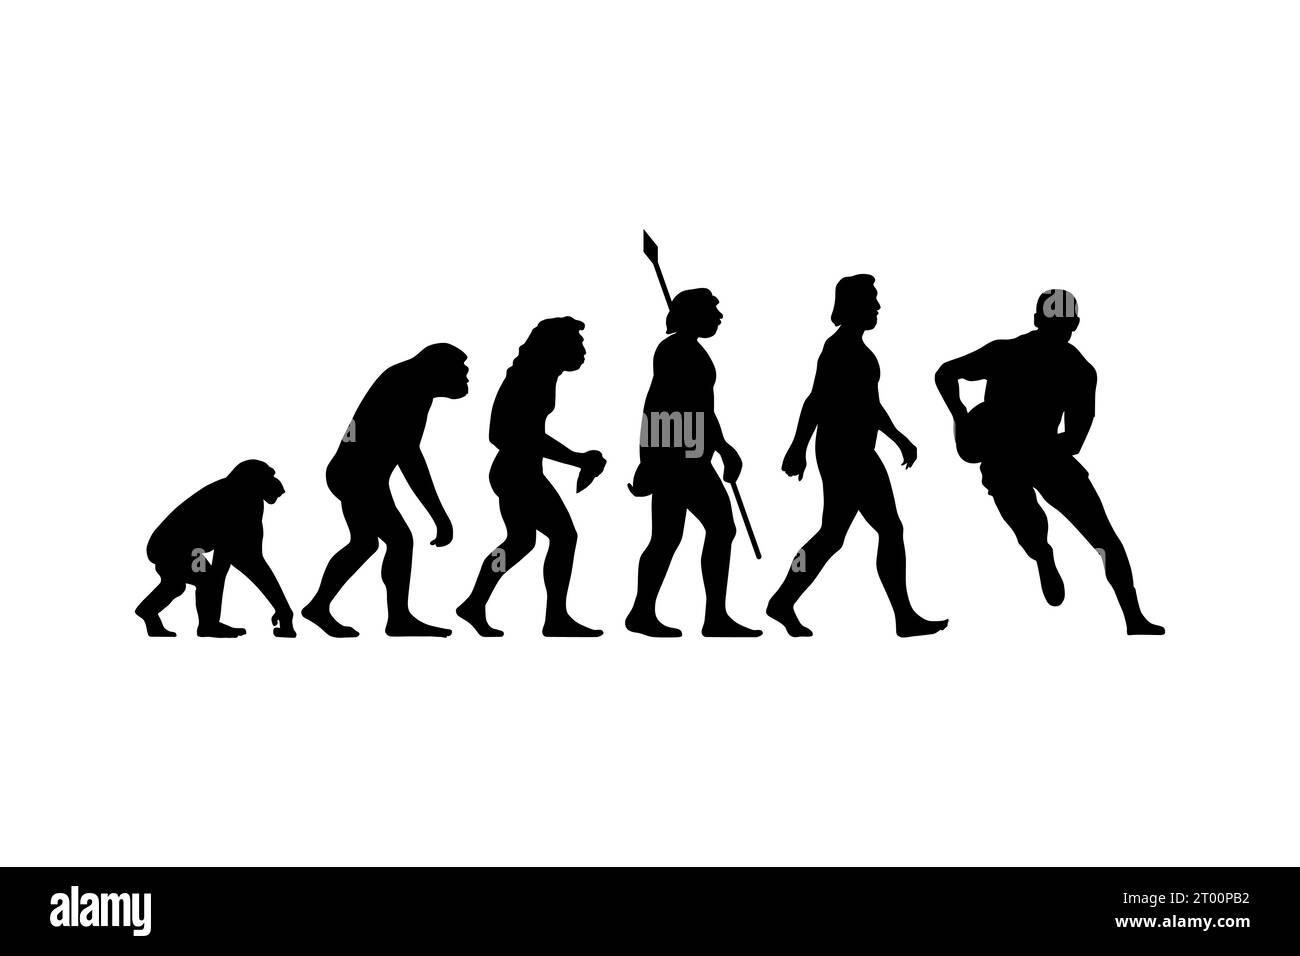 The Charles Darwin's theory of evolution can be metaphorically applied to various aspects of human culture and activities, including sports like rugby Stock Vector